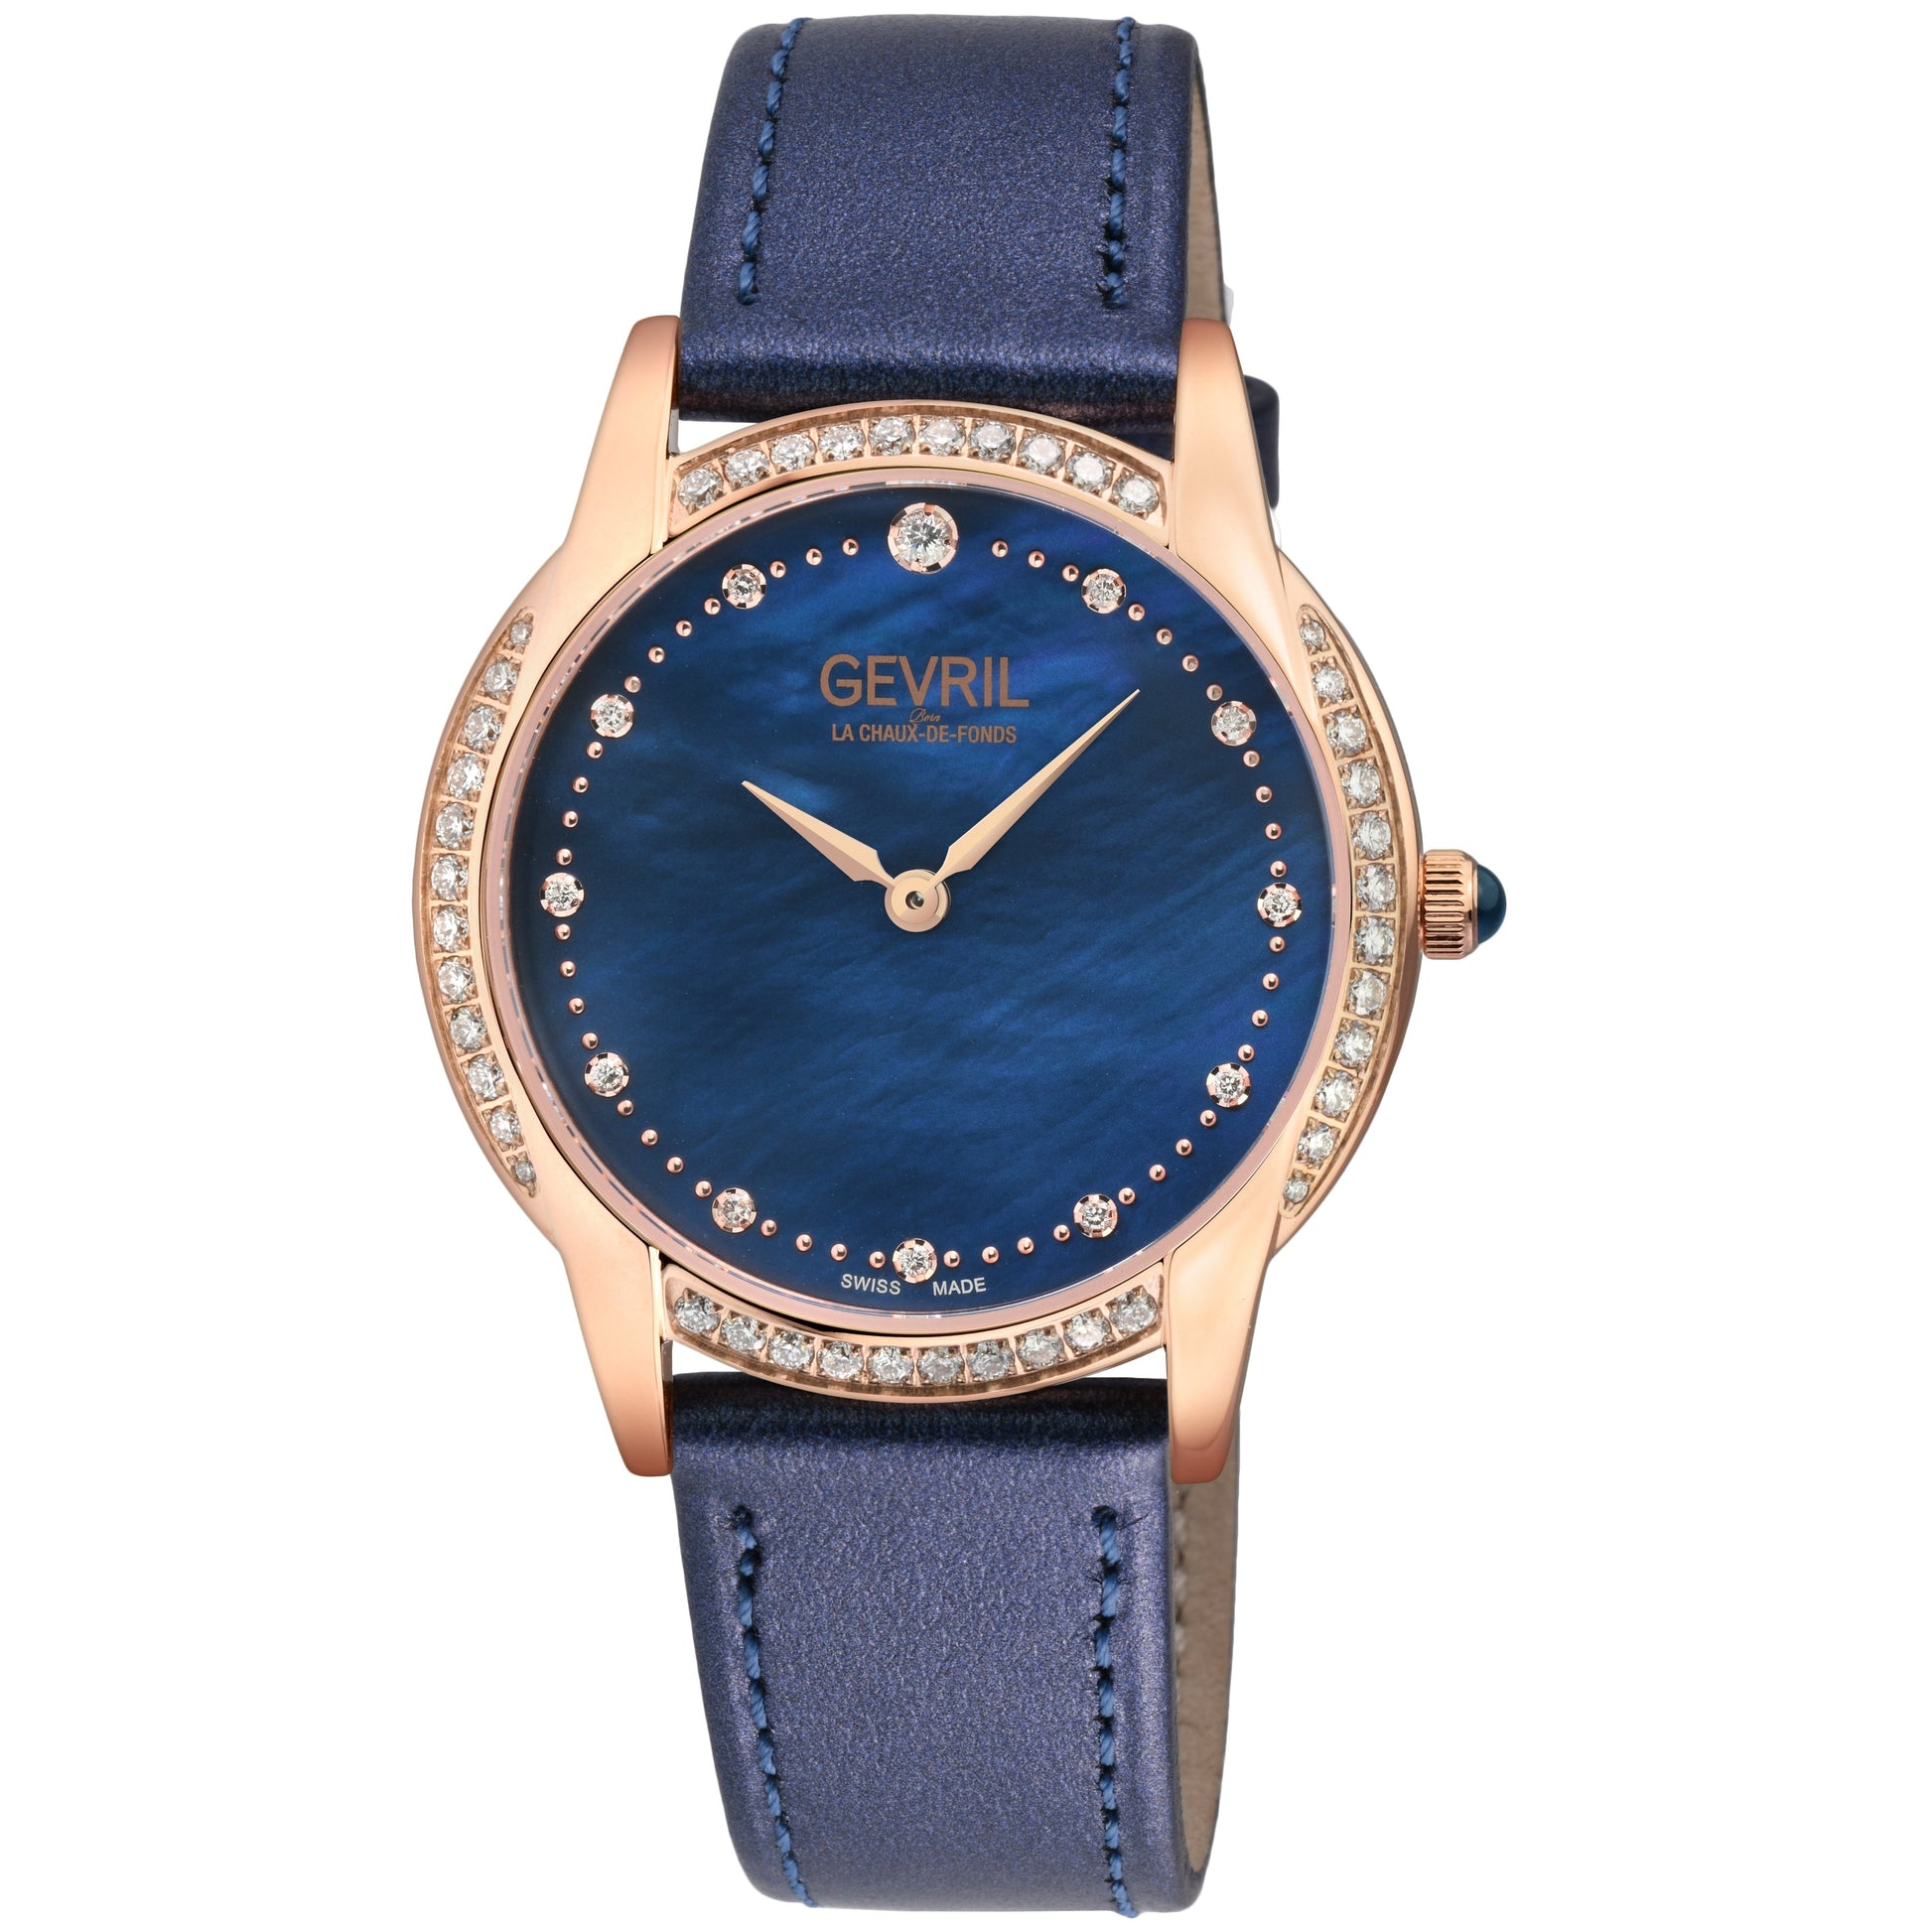 Gevril-Luxury-Swiss-Watches-Gevril Airolo - Diamond-13253